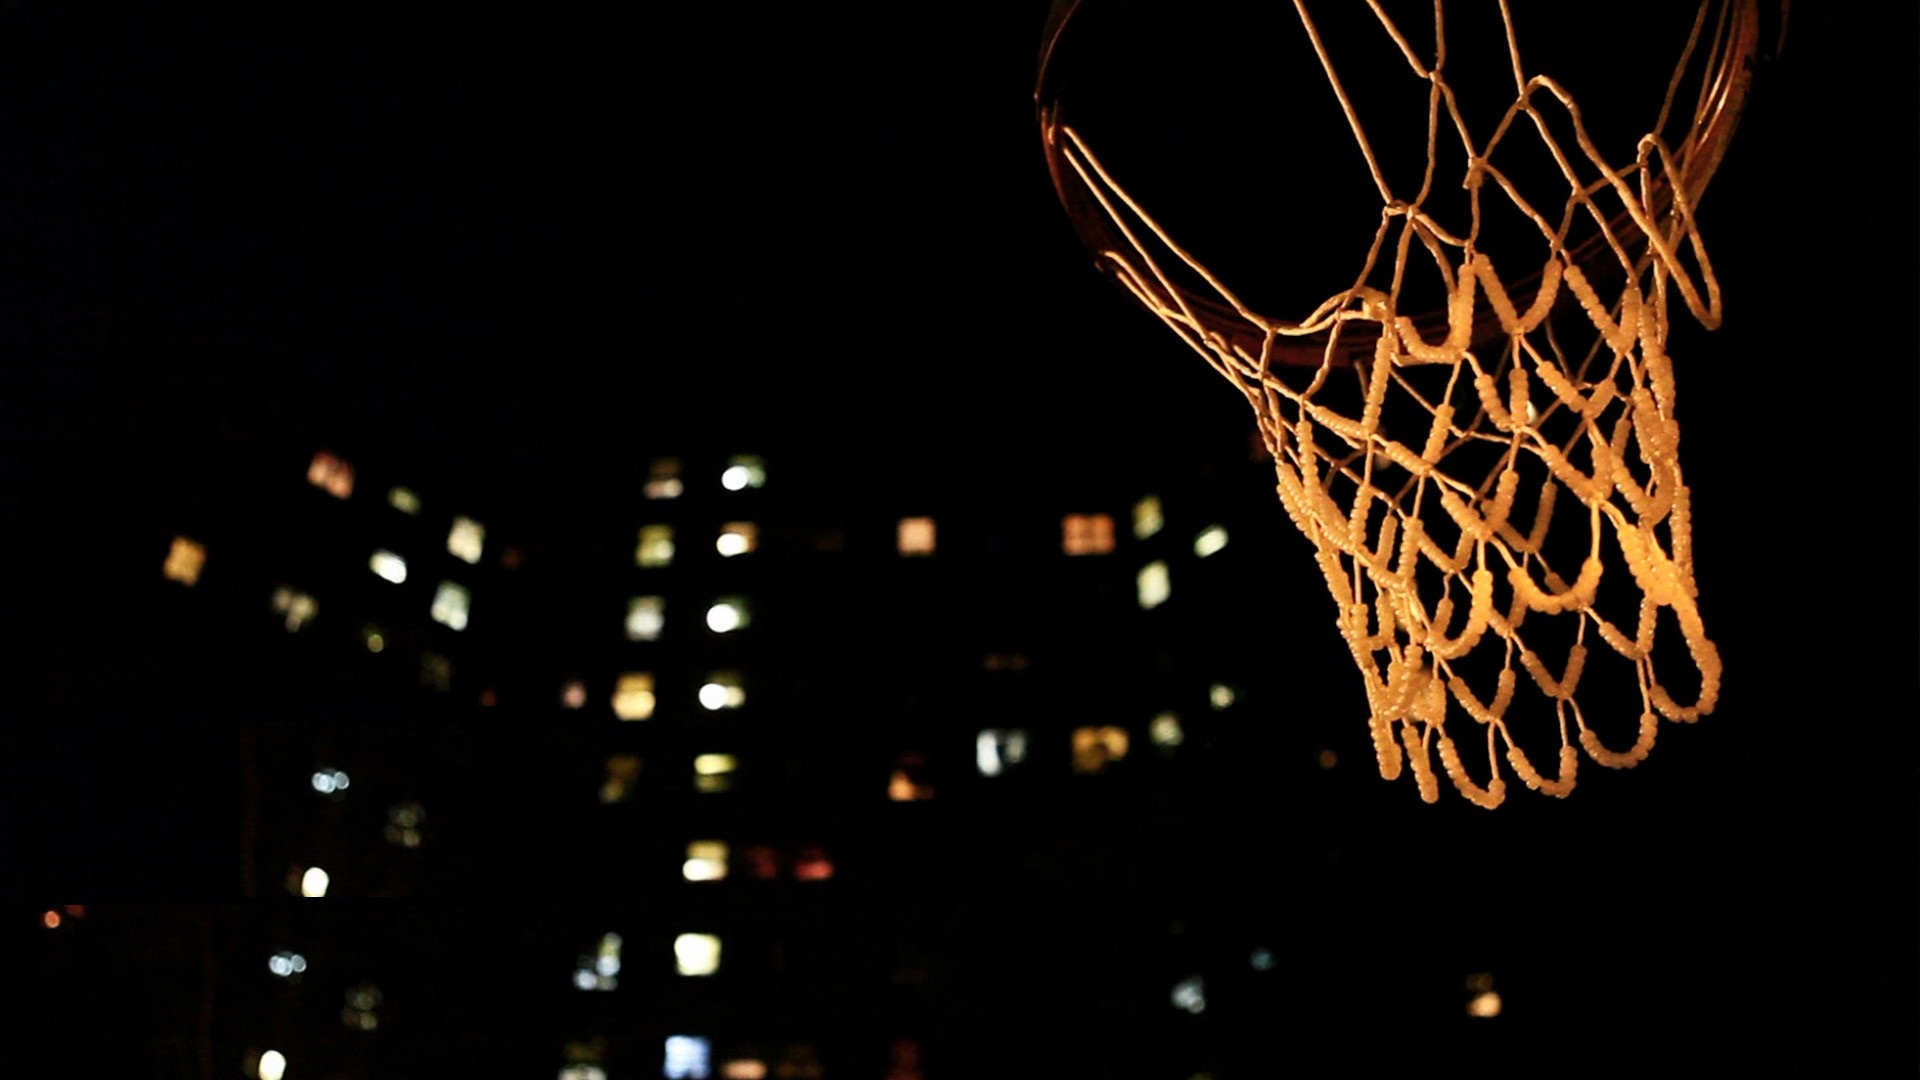 Windows Wallpaper Basketball Court with image dimensions 1920x1080 pixel. You can make this wallpaper for your Desktop Computer Backgrounds, Windows or Mac Screensavers, iPhone Lock screen, Tablet or Android and another Mobile Phone device